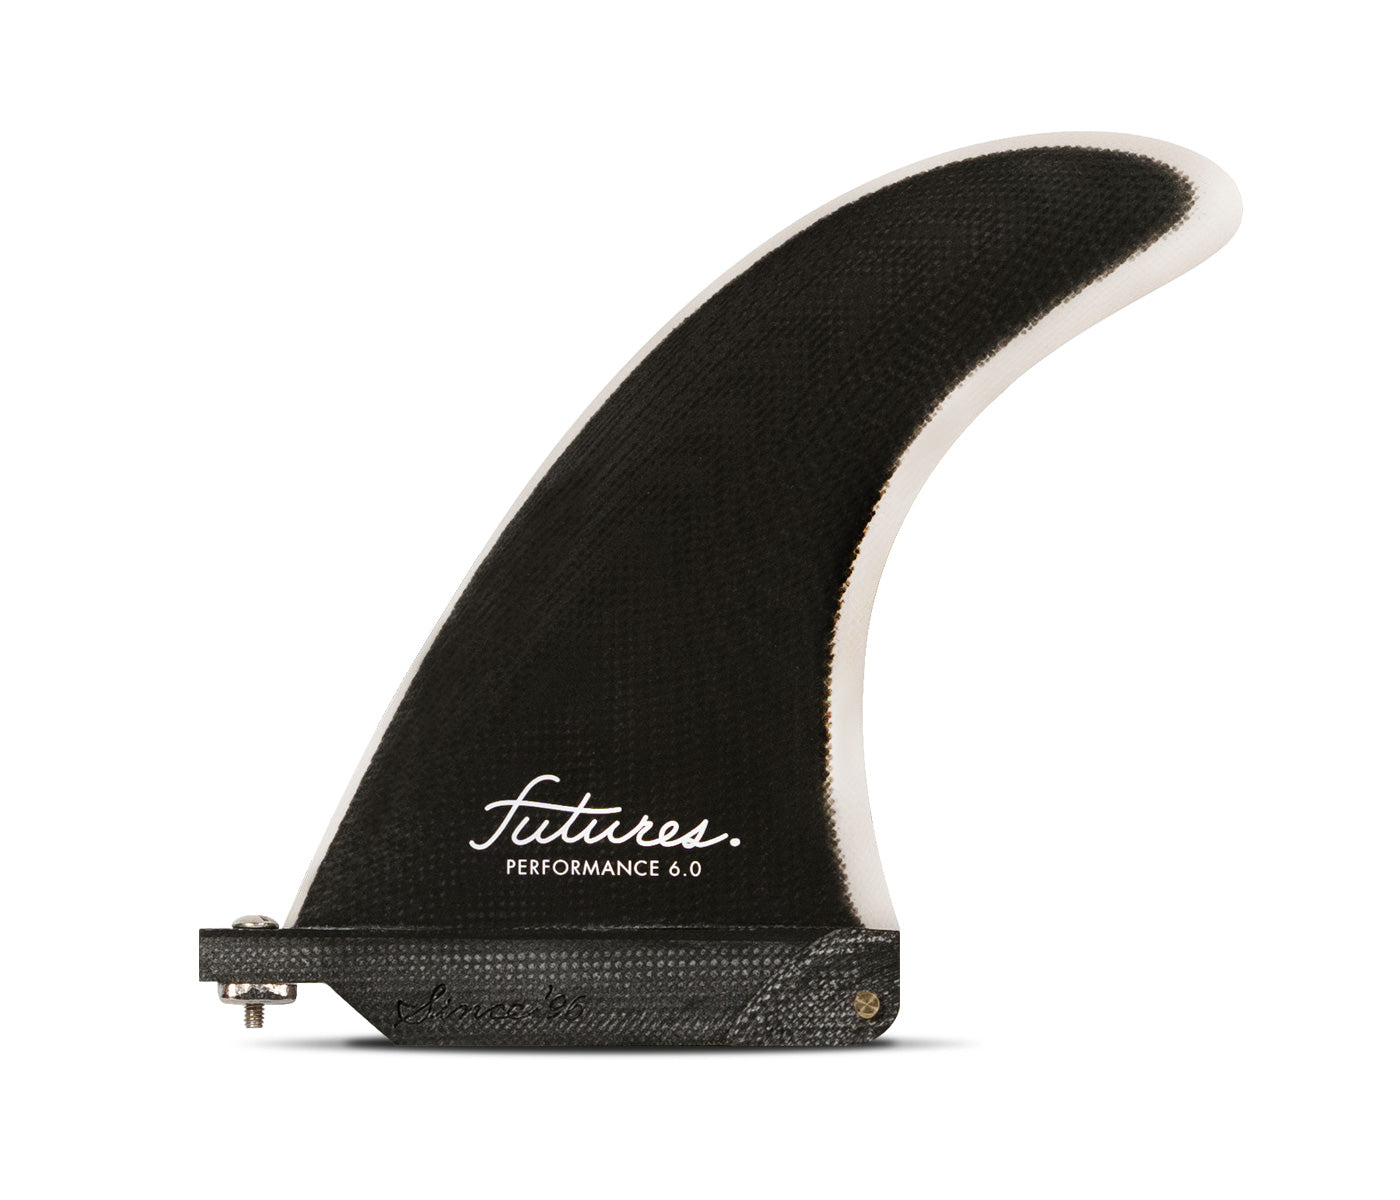 Performance 6.0, All Sizes, Single Surfboard Fins